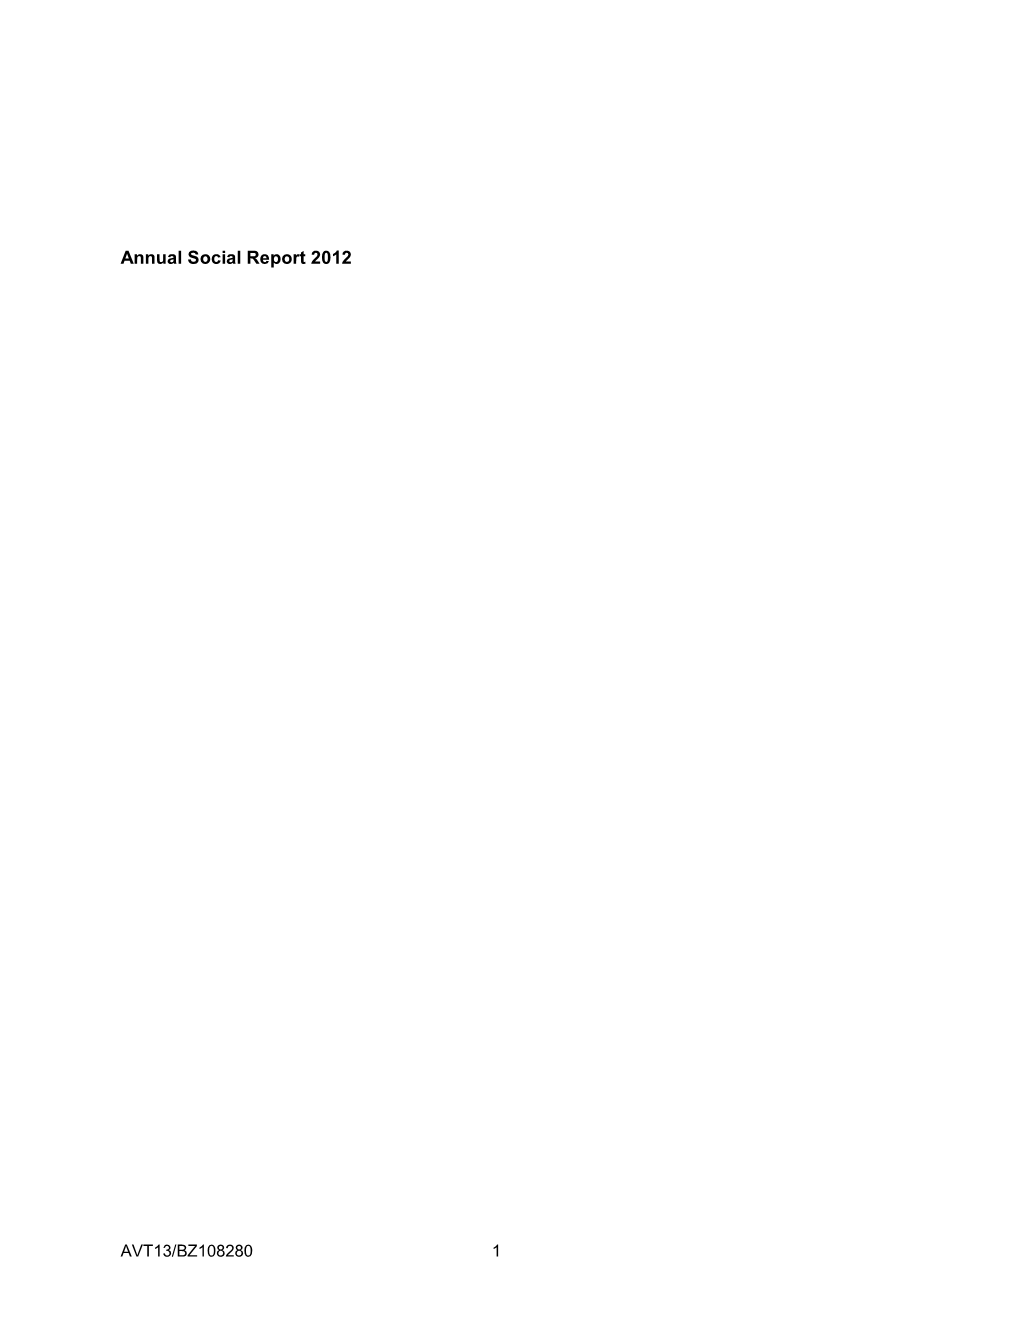 Download "Annual Social Report 2012 of The